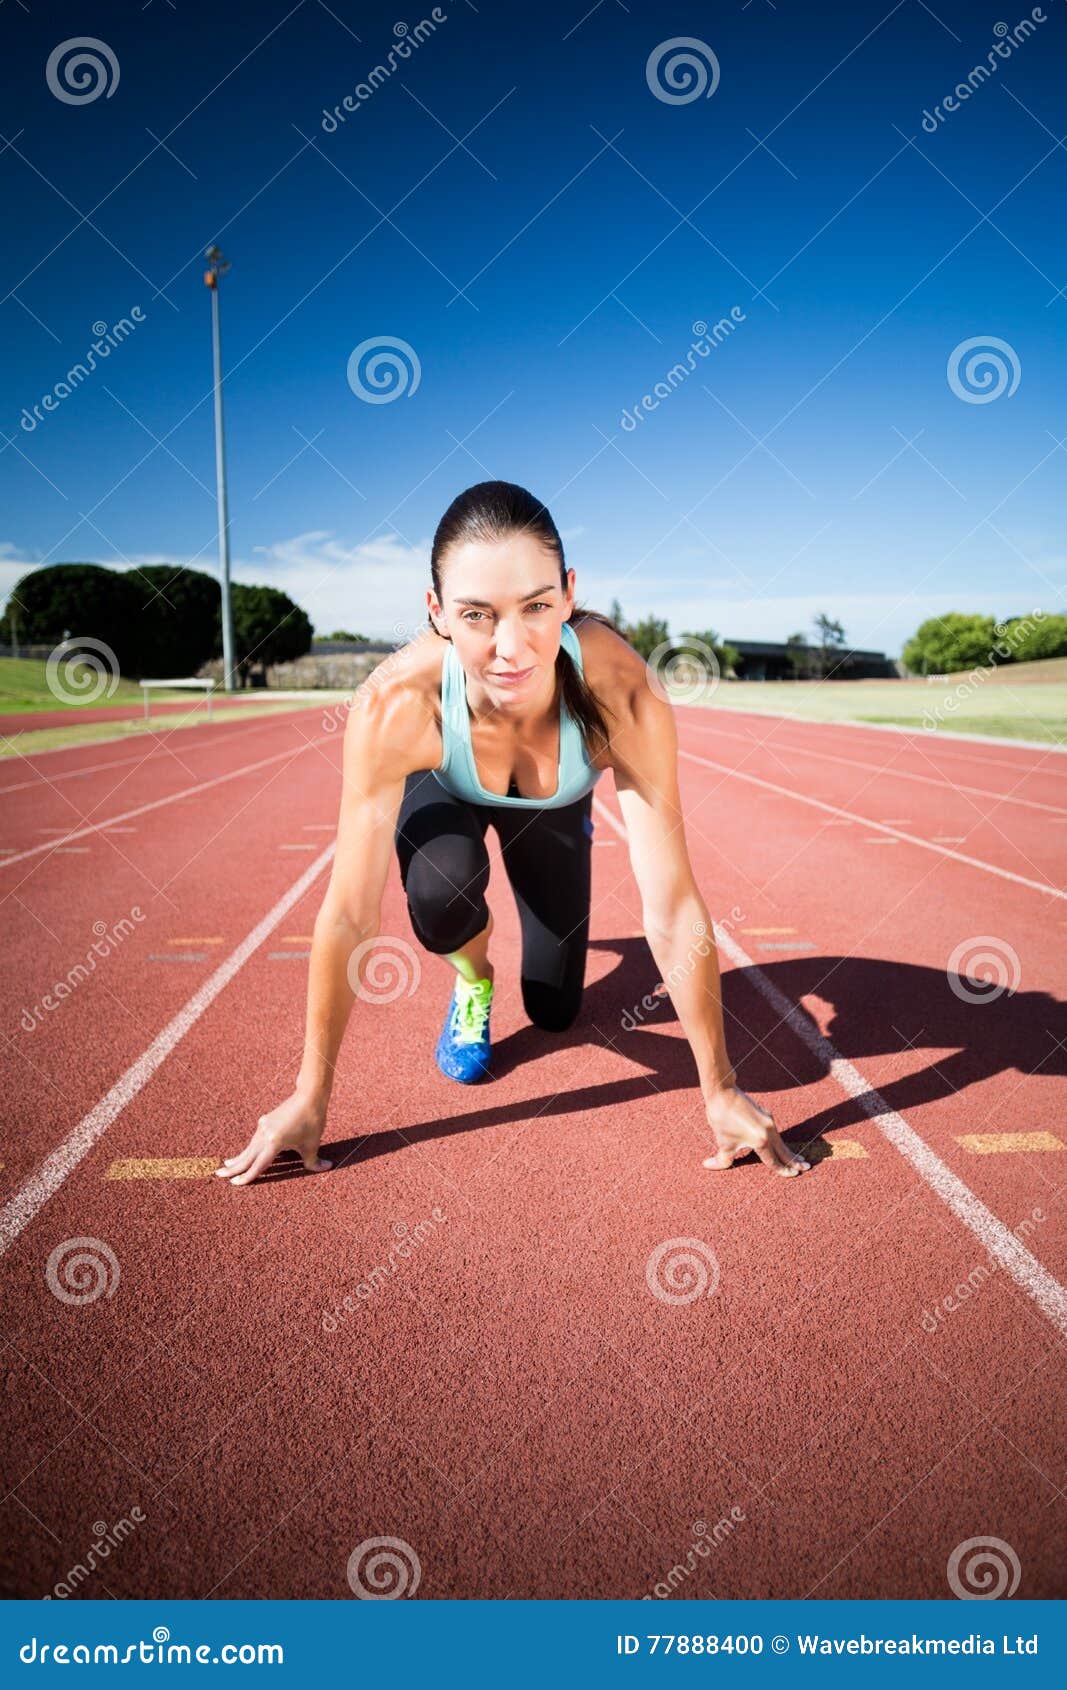 Action Packed Close-Up Image Of A Female Athlete Leaving 